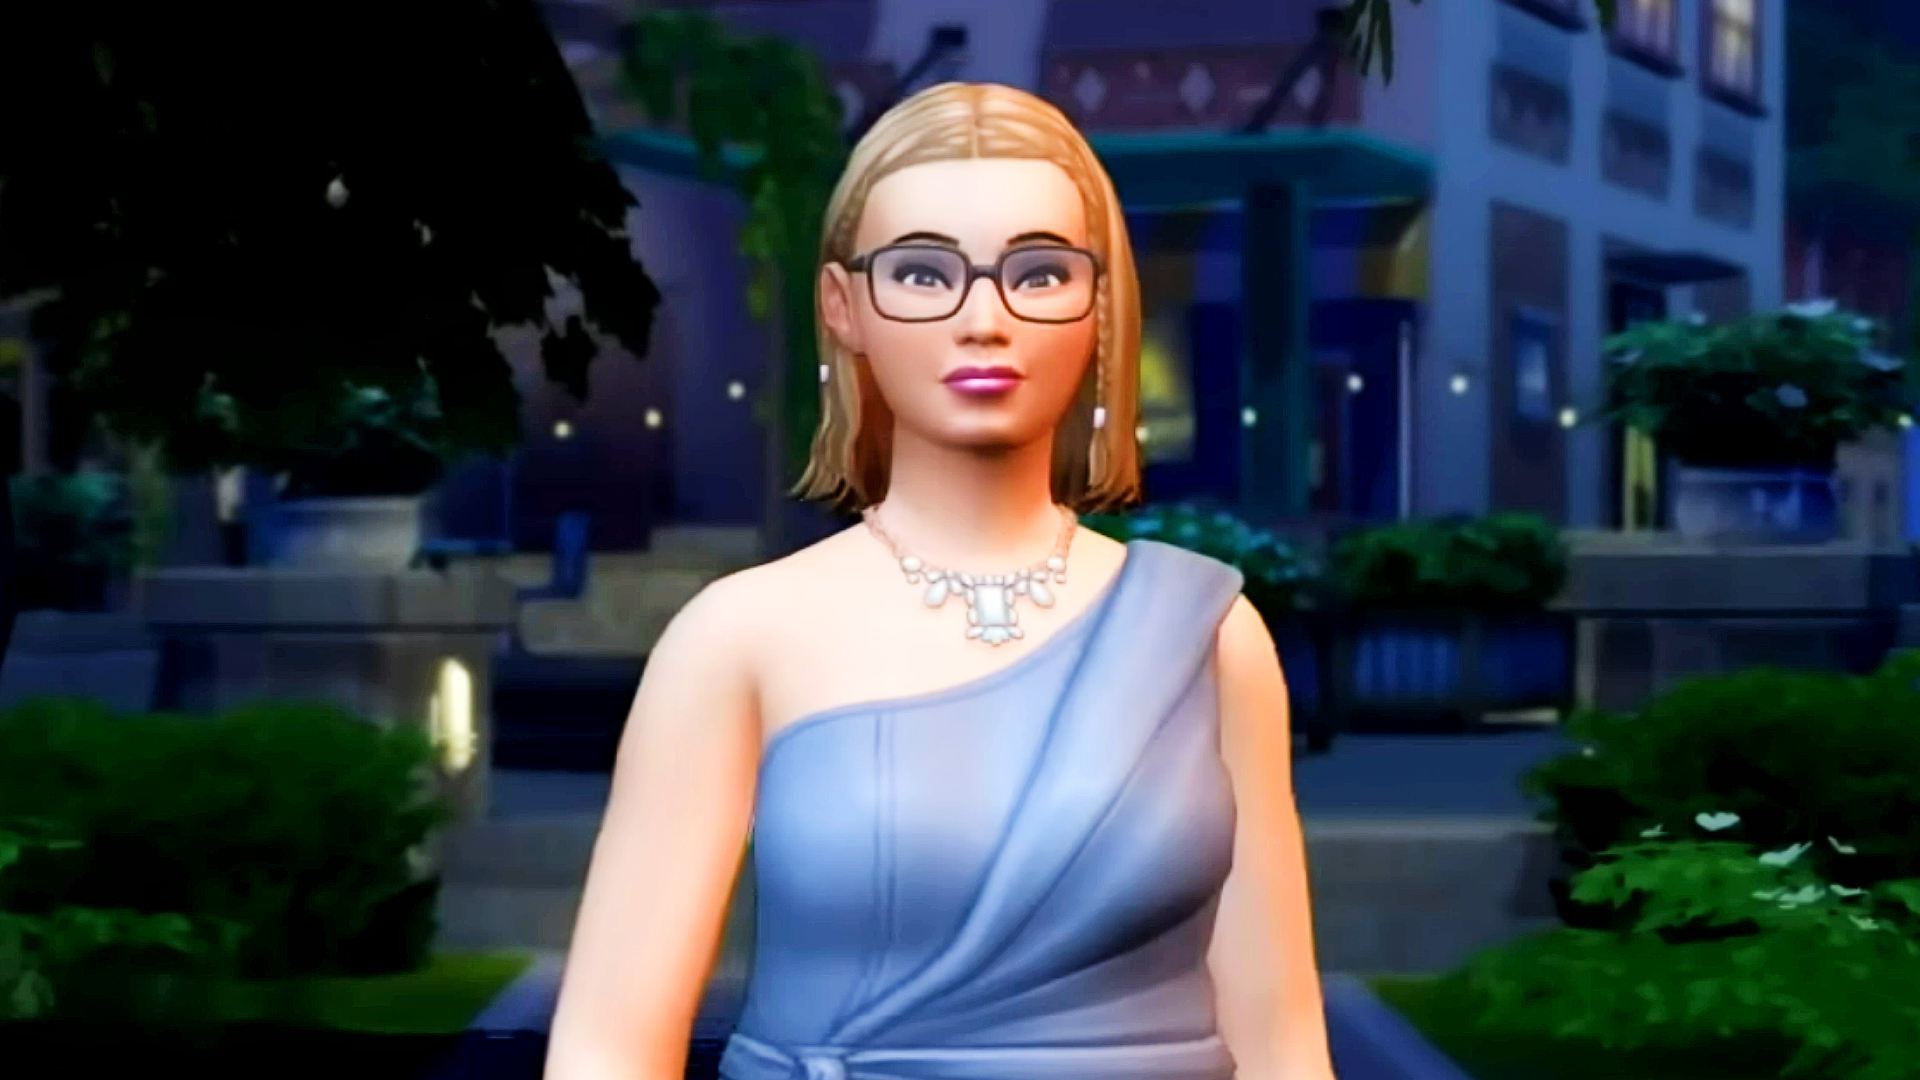 The best Sims 4 mods in 2022